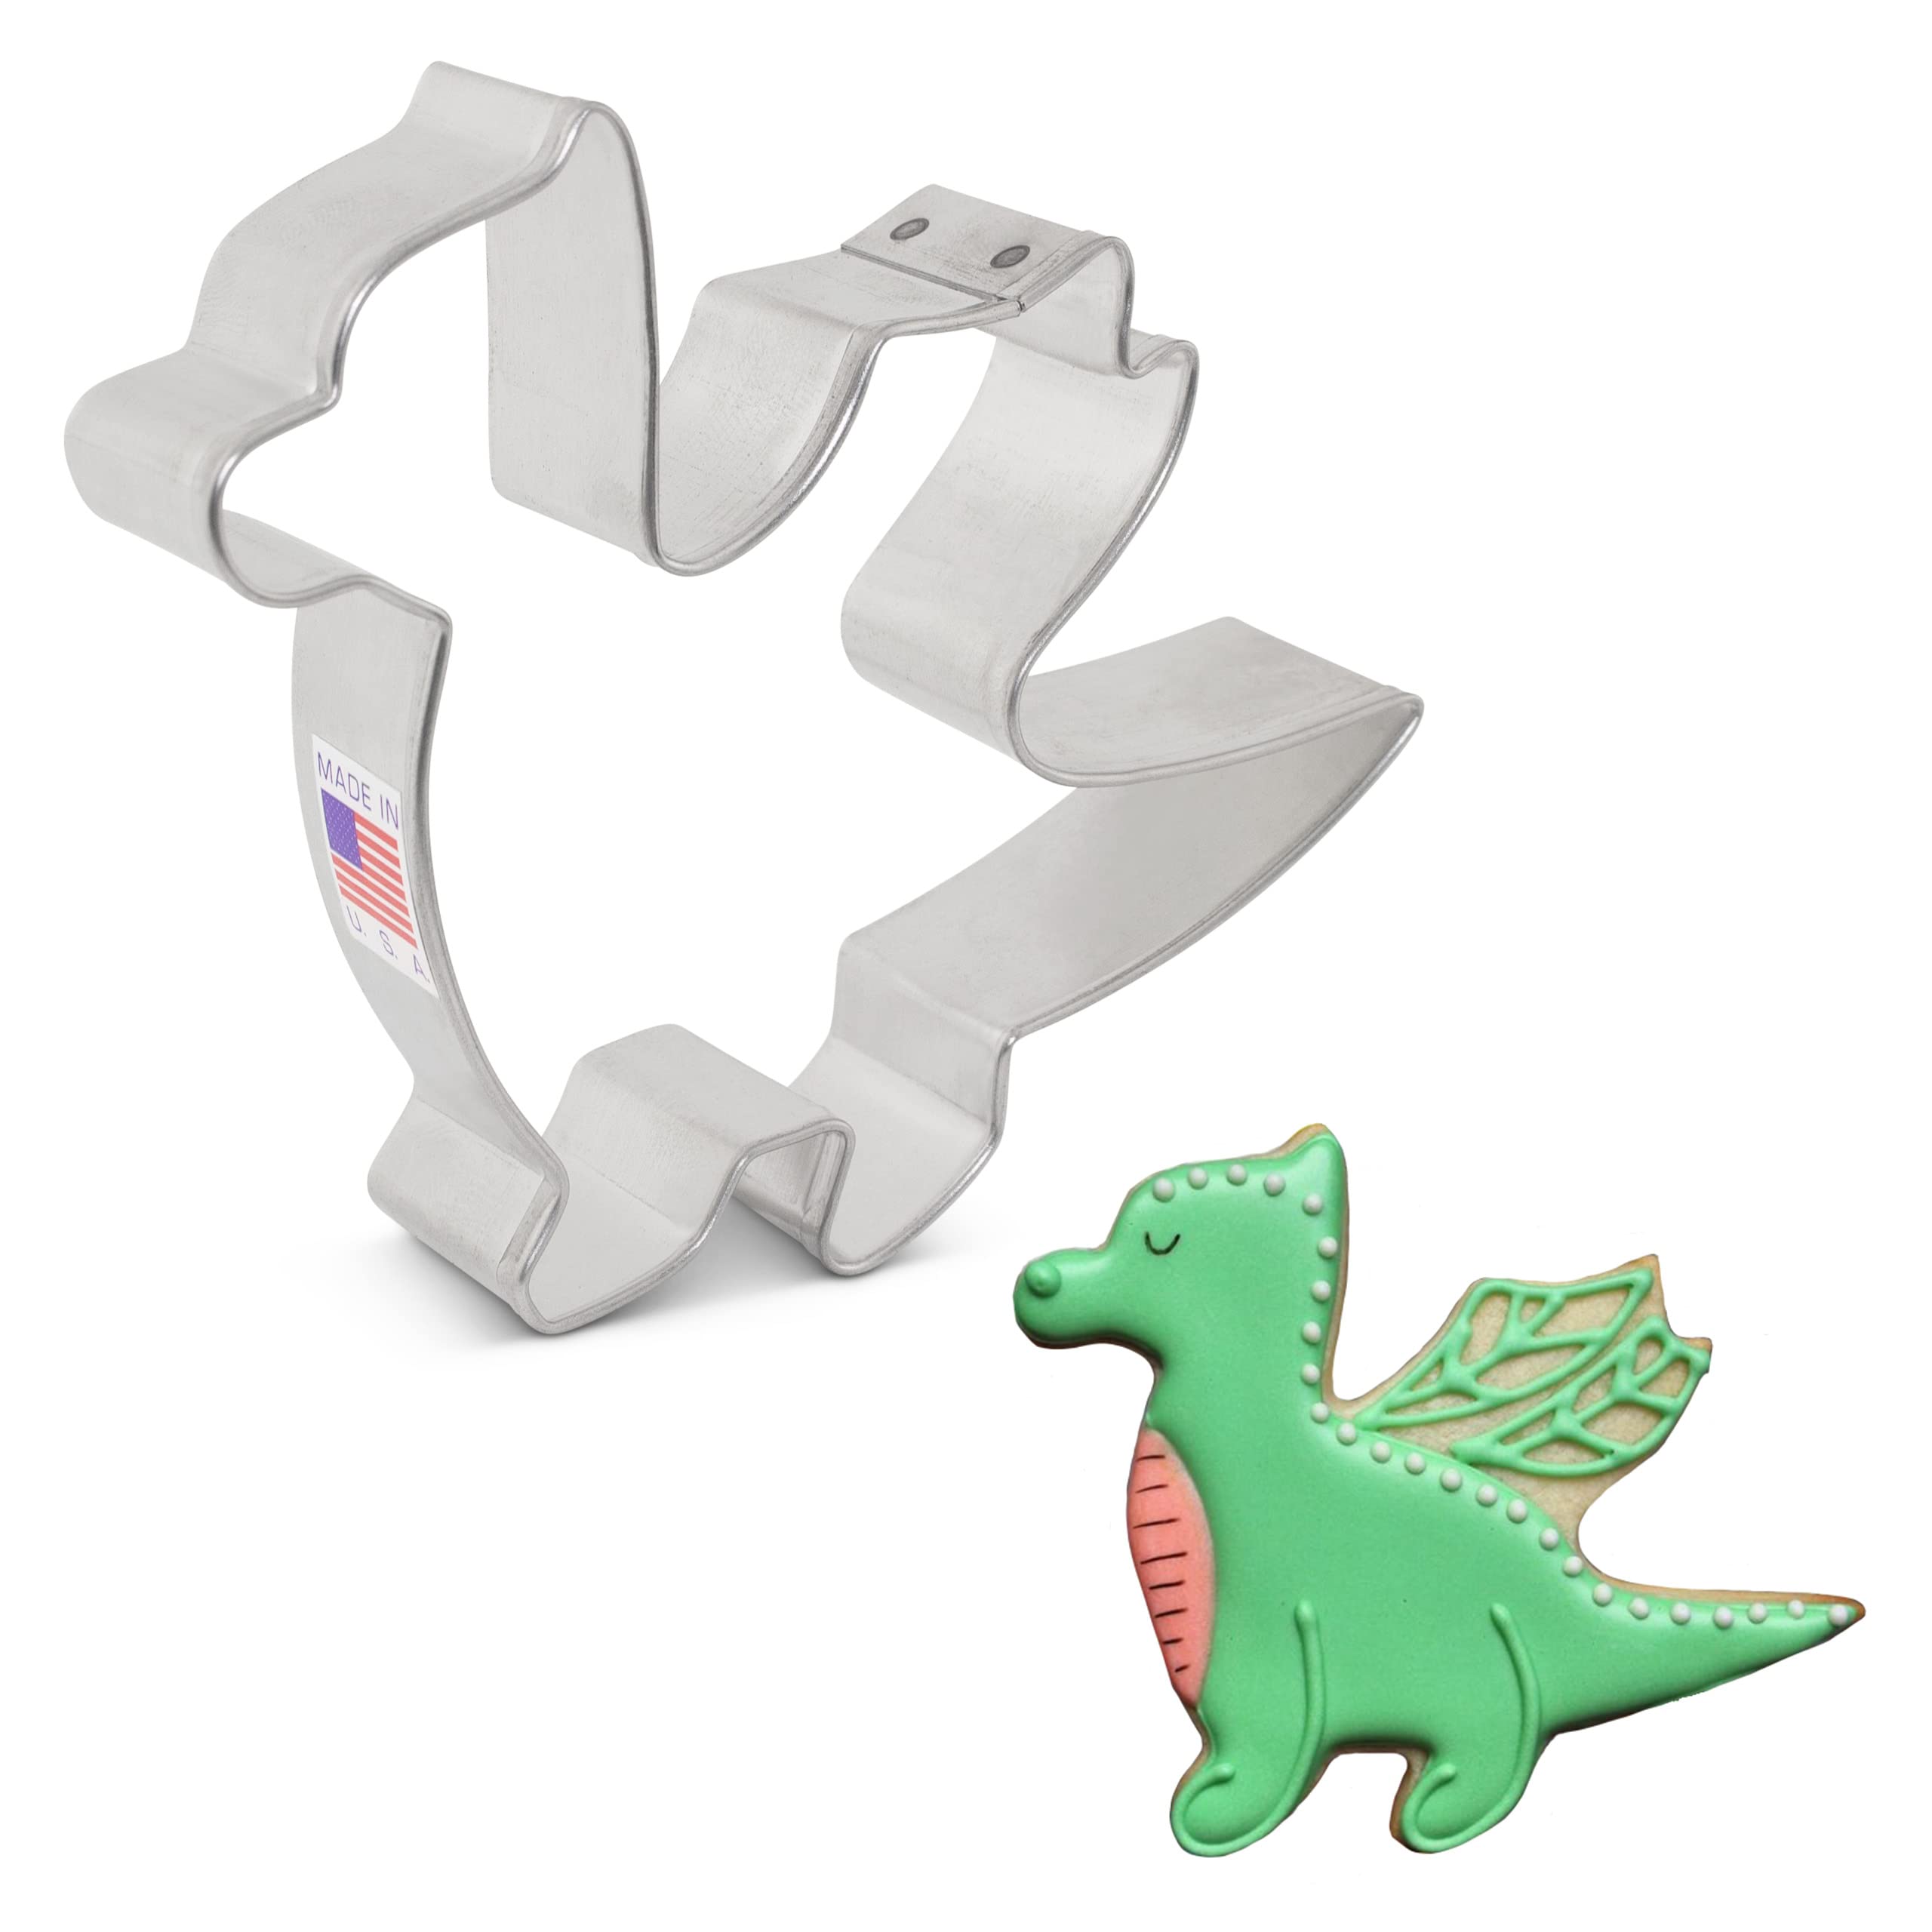 Dragon Cookie Cutter, 4" Made in USA by Ann Clark